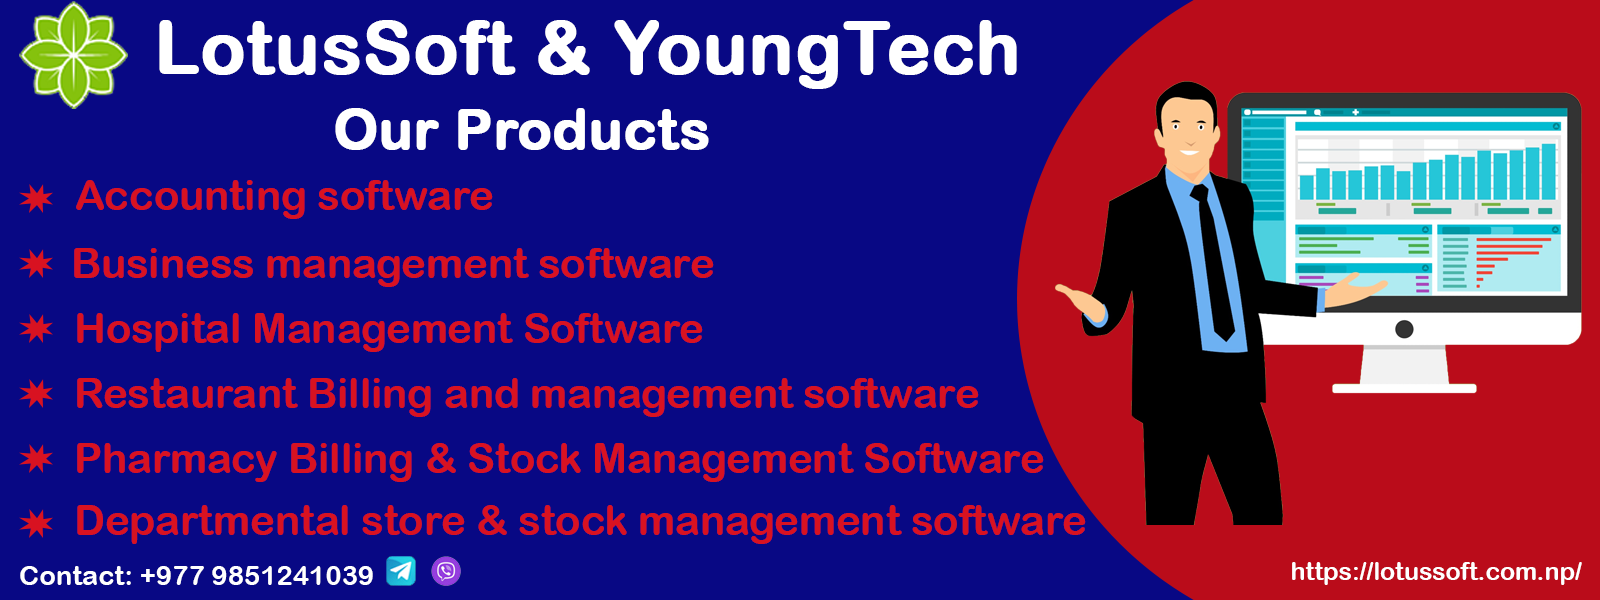 Some of the product LotusSoft & YoungTech